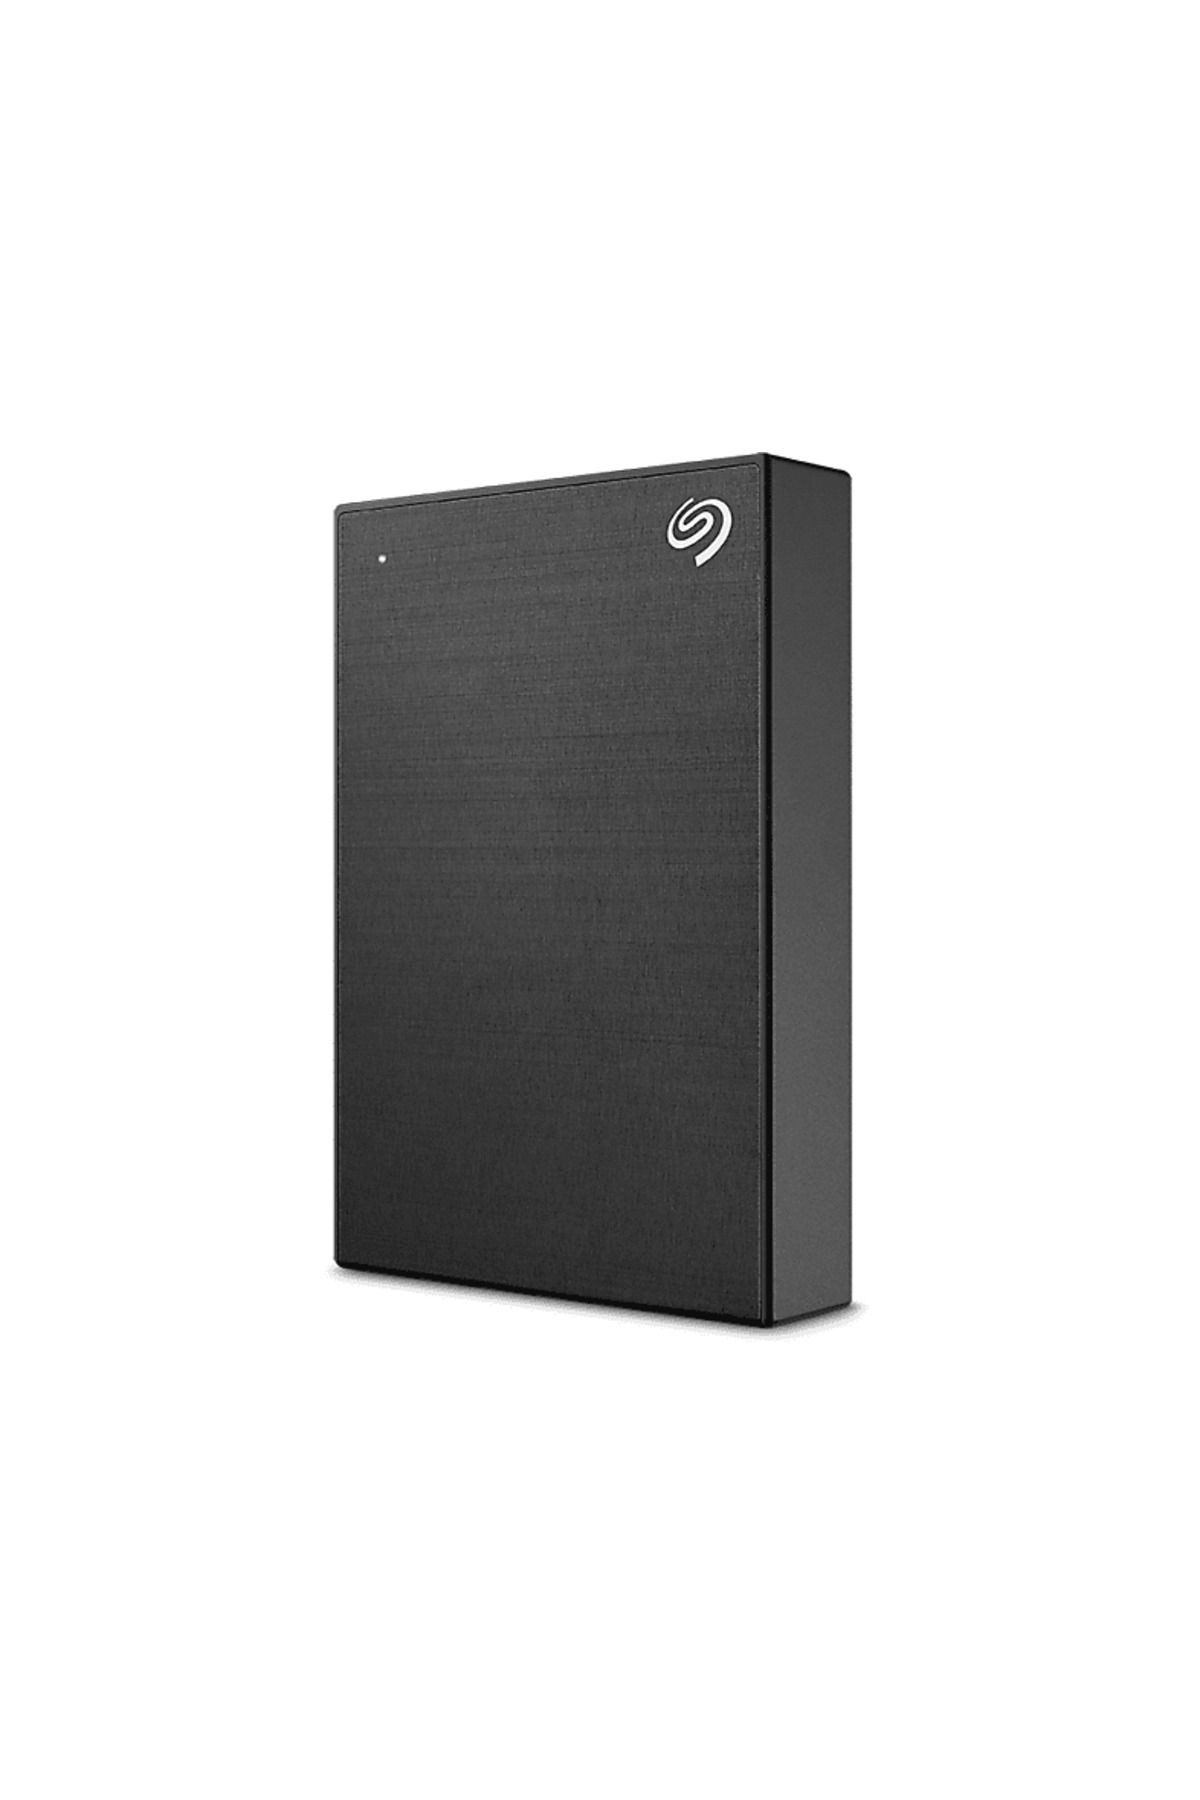 Seagate One Touch with Password 2 TB Harici Disk Siyah STKY2000400